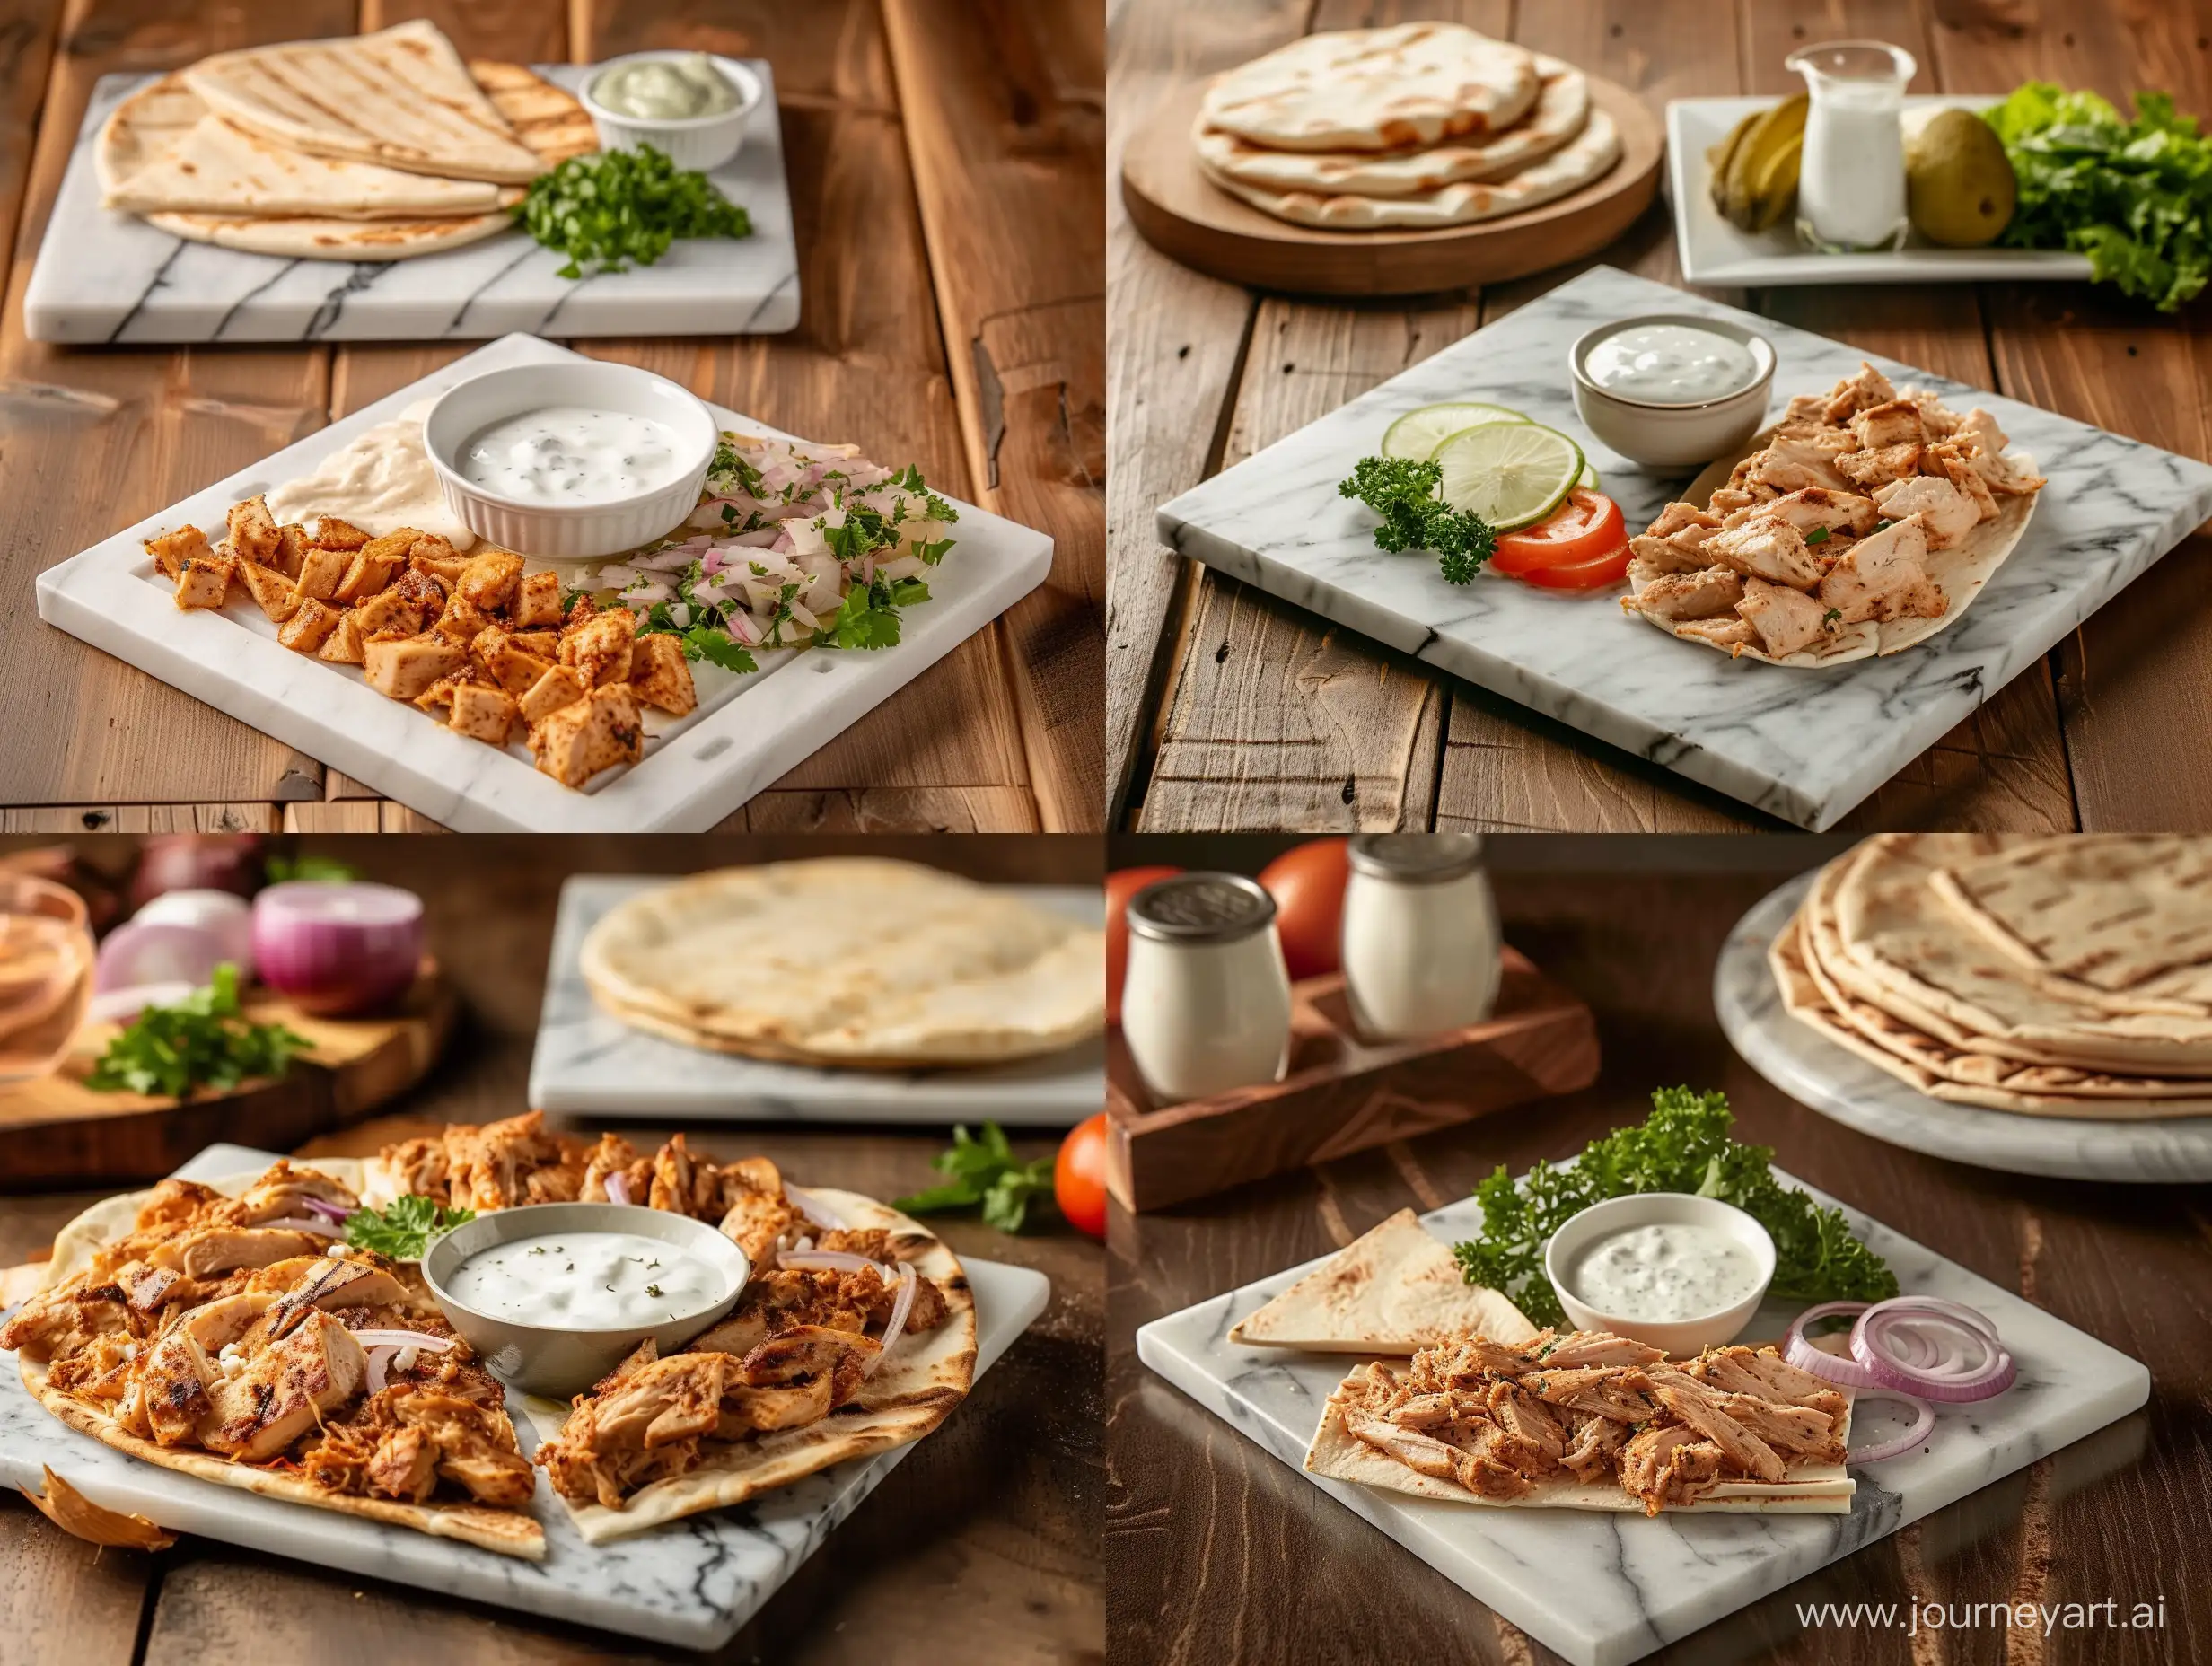 Savory-Chicken-Gyros-with-Fresh-Ingredients-on-Wooden-Table